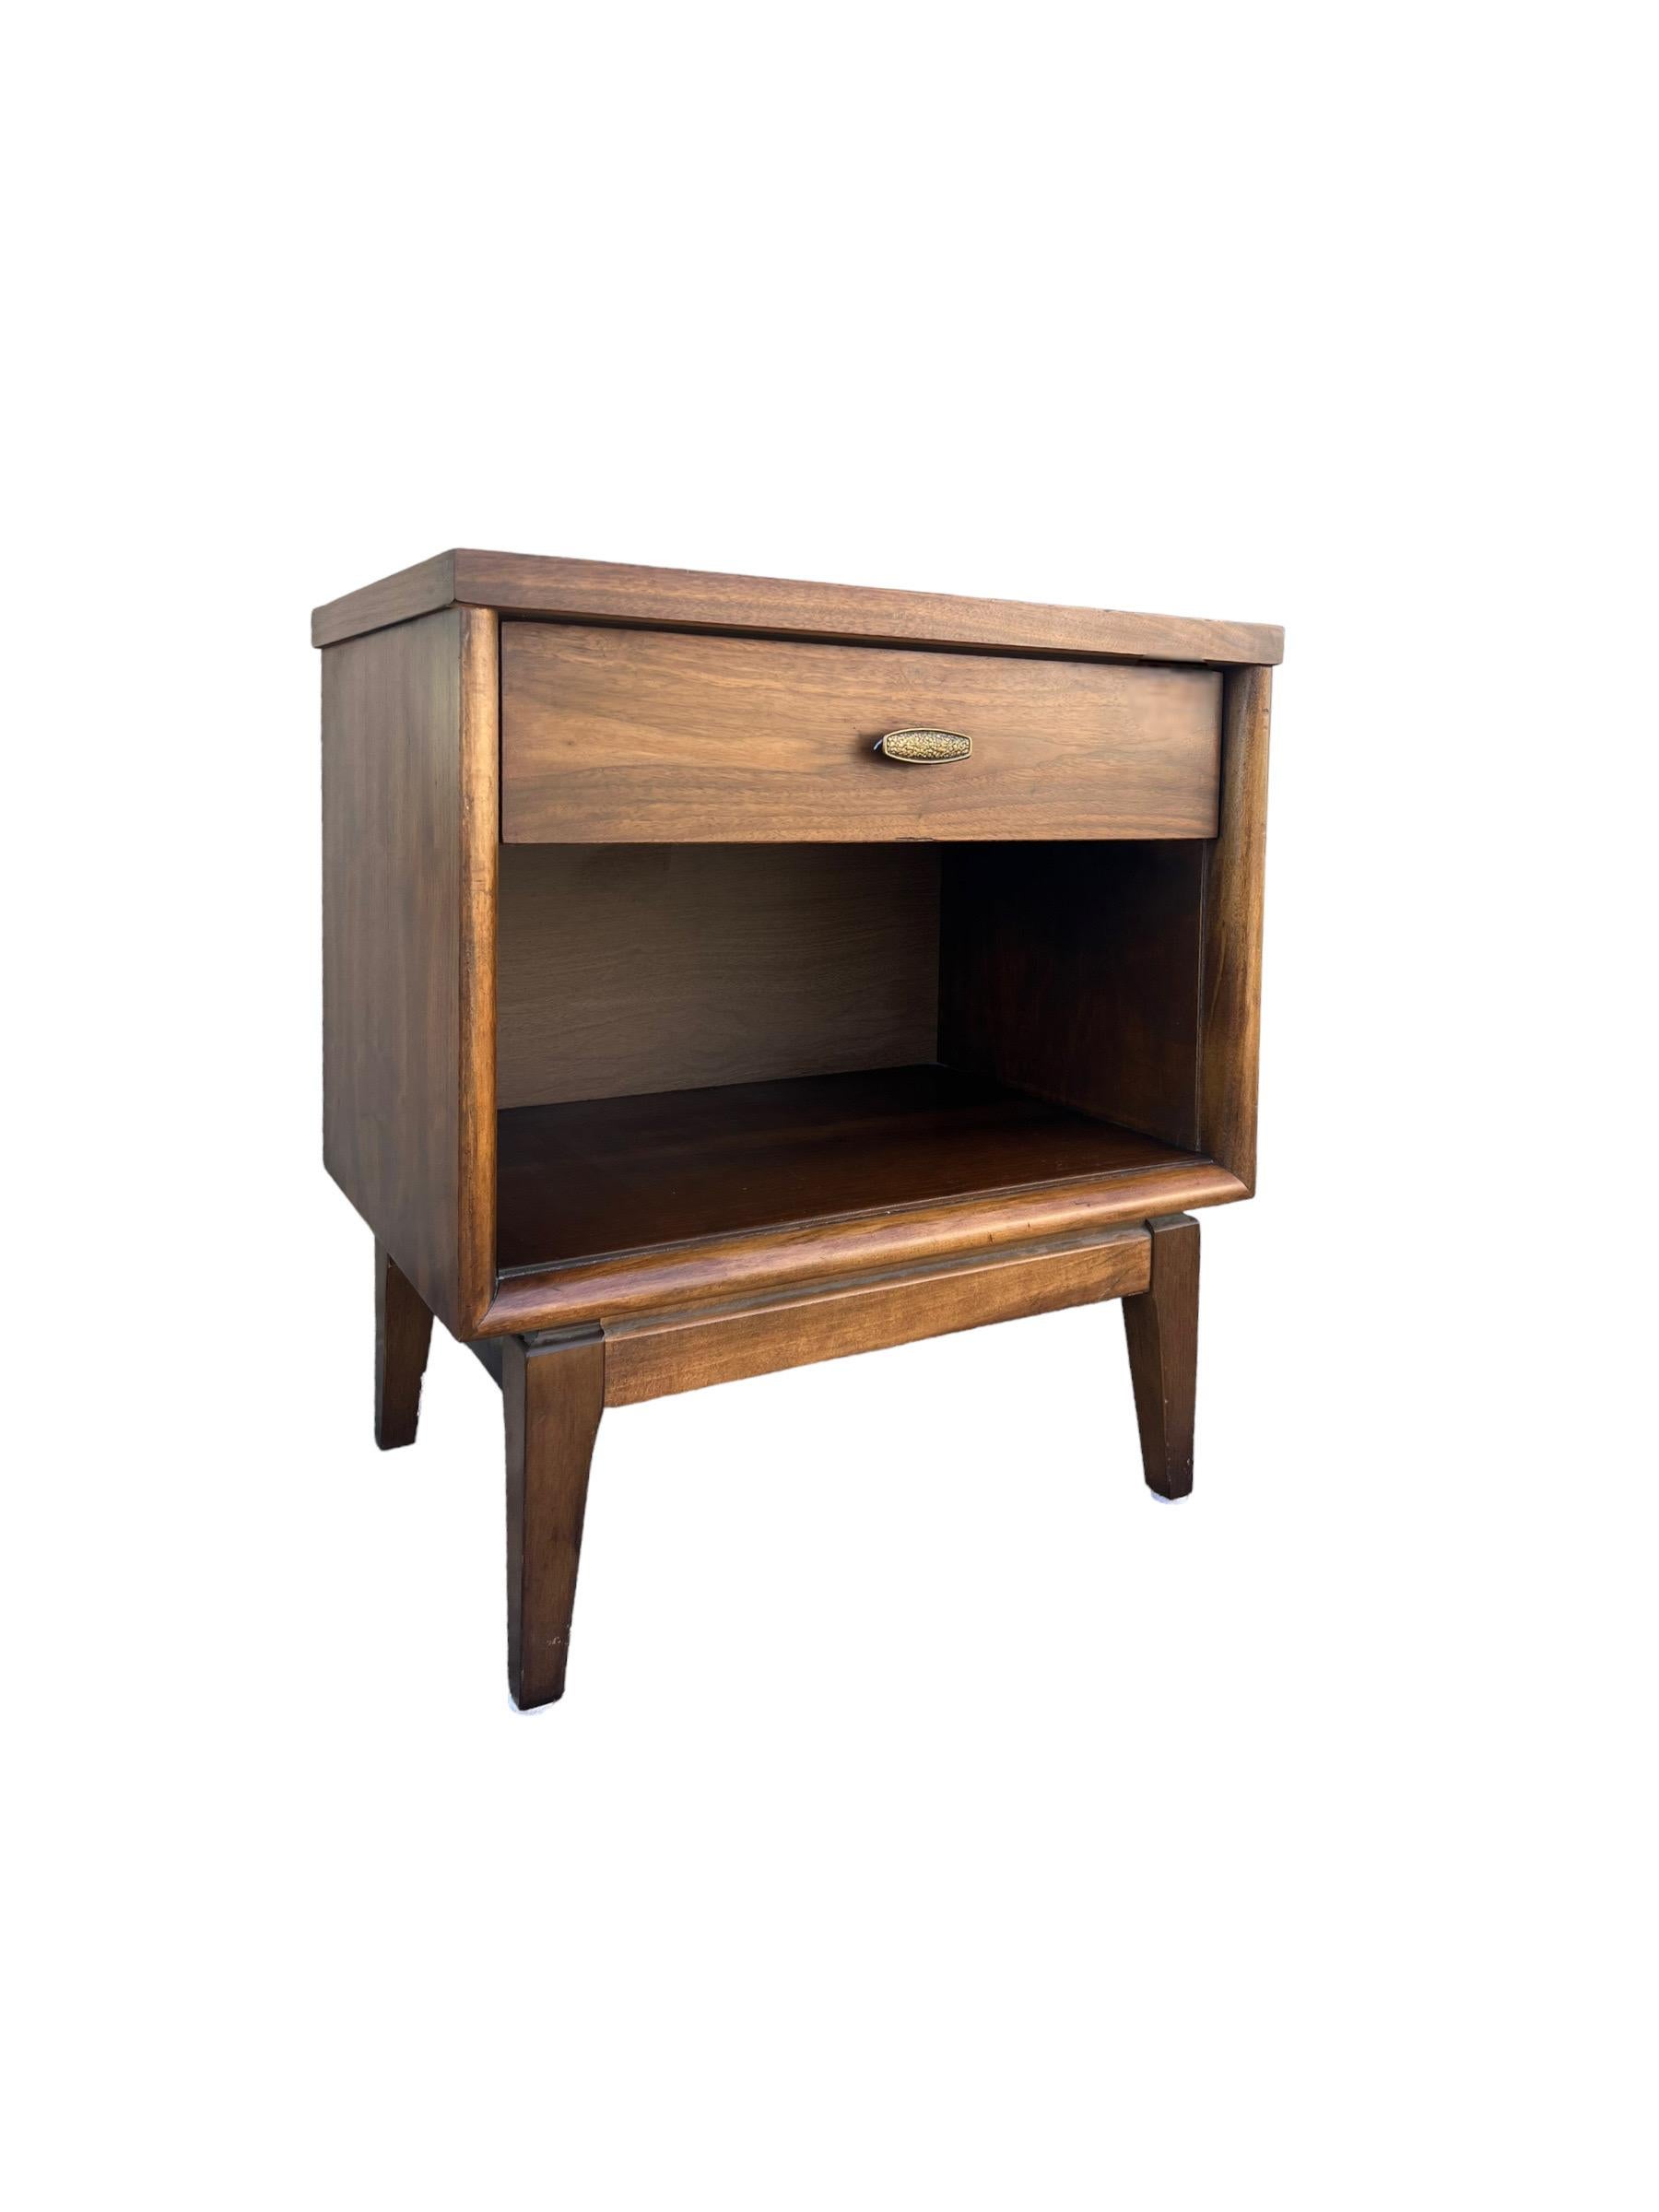 Vintage Mid Century Modern Nightstands. Nightstands have a Single Dovetail Drawer with Original Hardware and Classic mcm Lines and Details.

Dimensions. 22 W ; 15 D ; 24 H